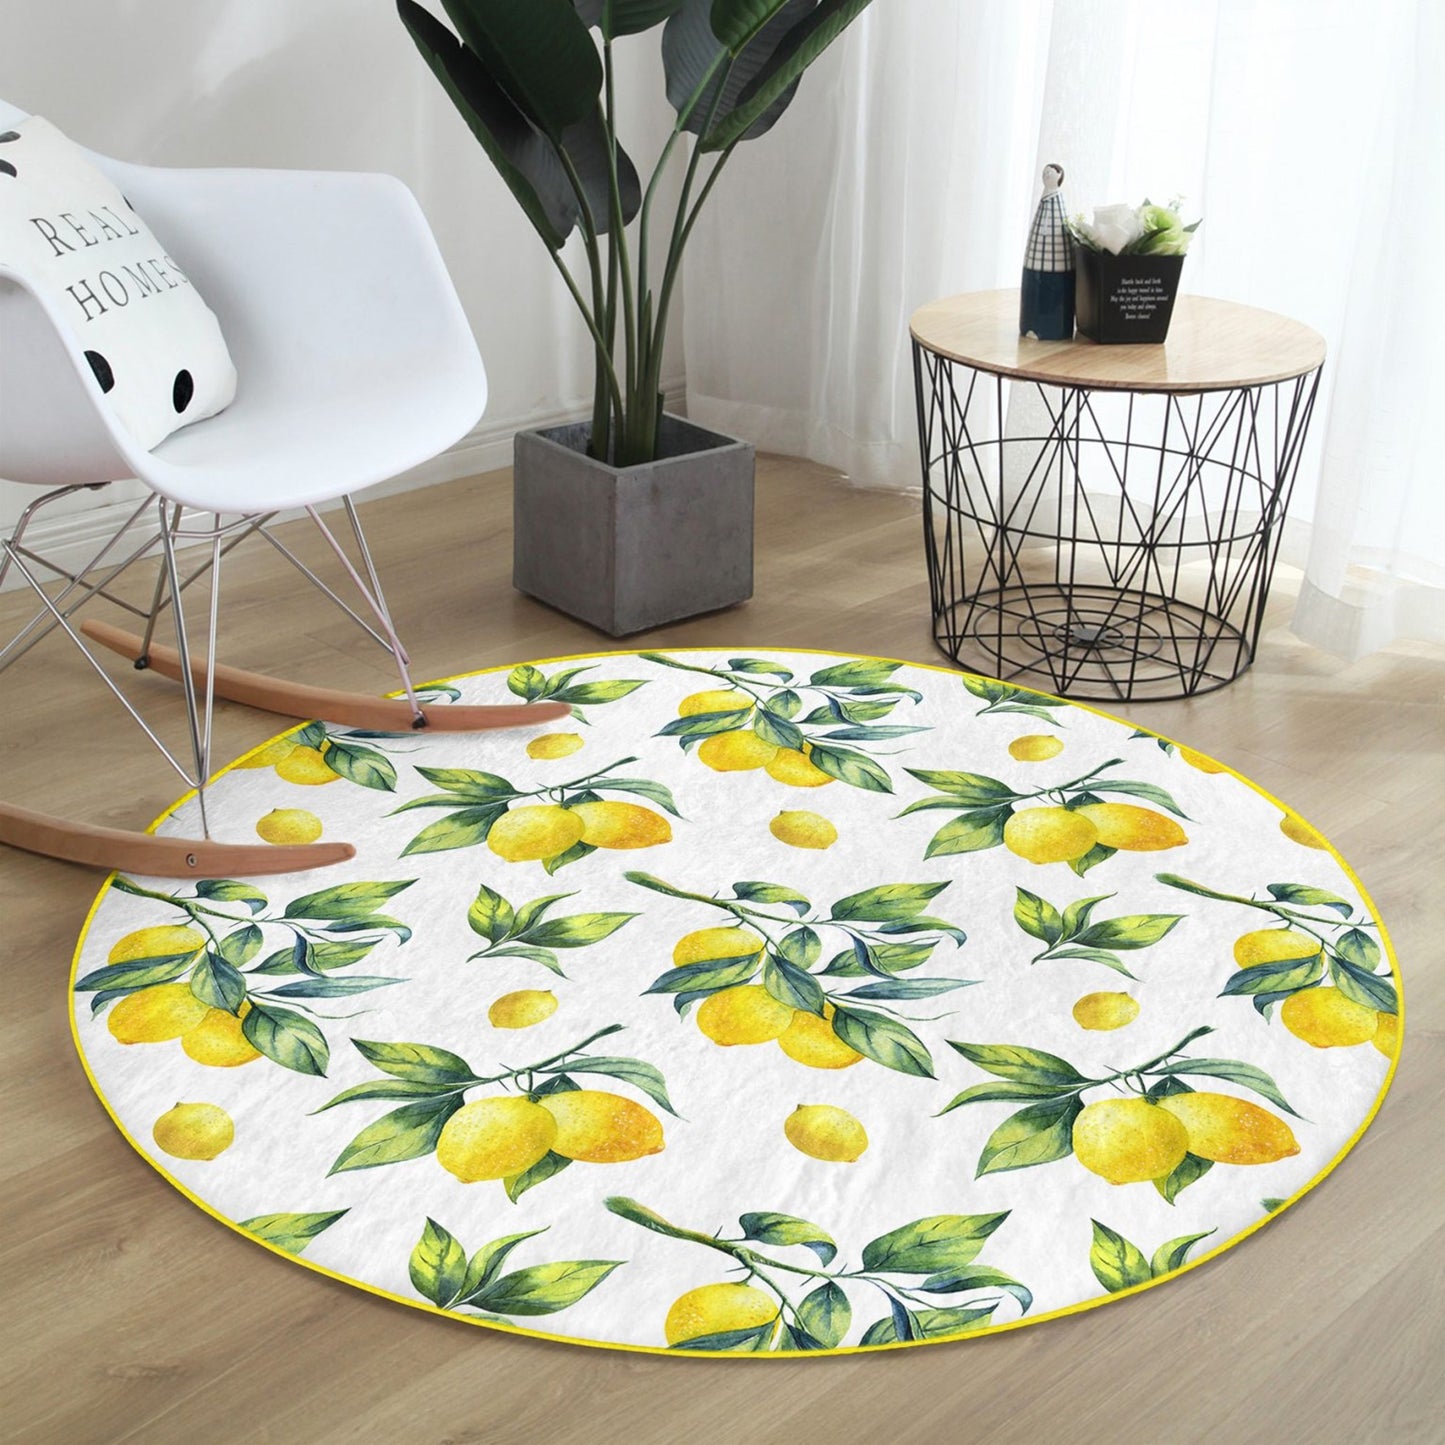 Round Patterned Floor Rug - Natural Accent